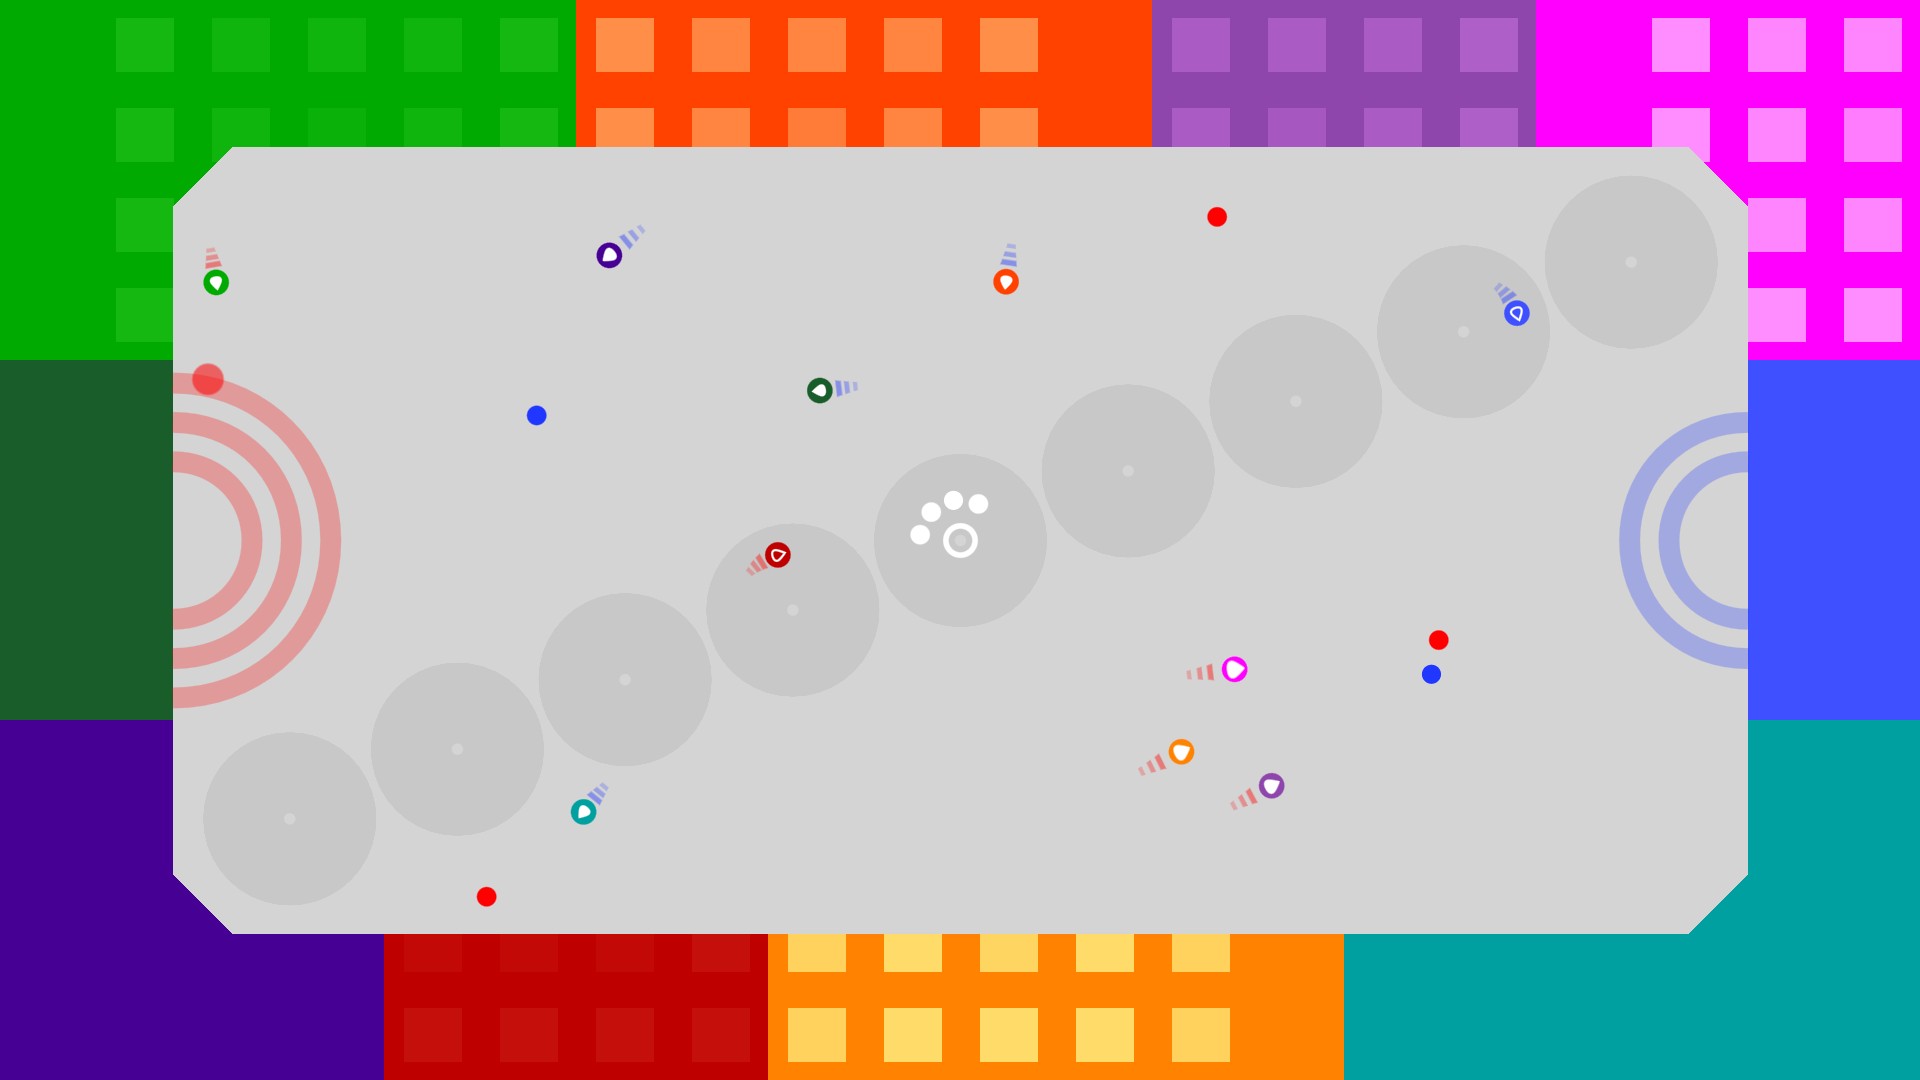 12 orbits ◦ local multiplayer for 2, 3, 4, 5, 6... 12 players ◦ Free